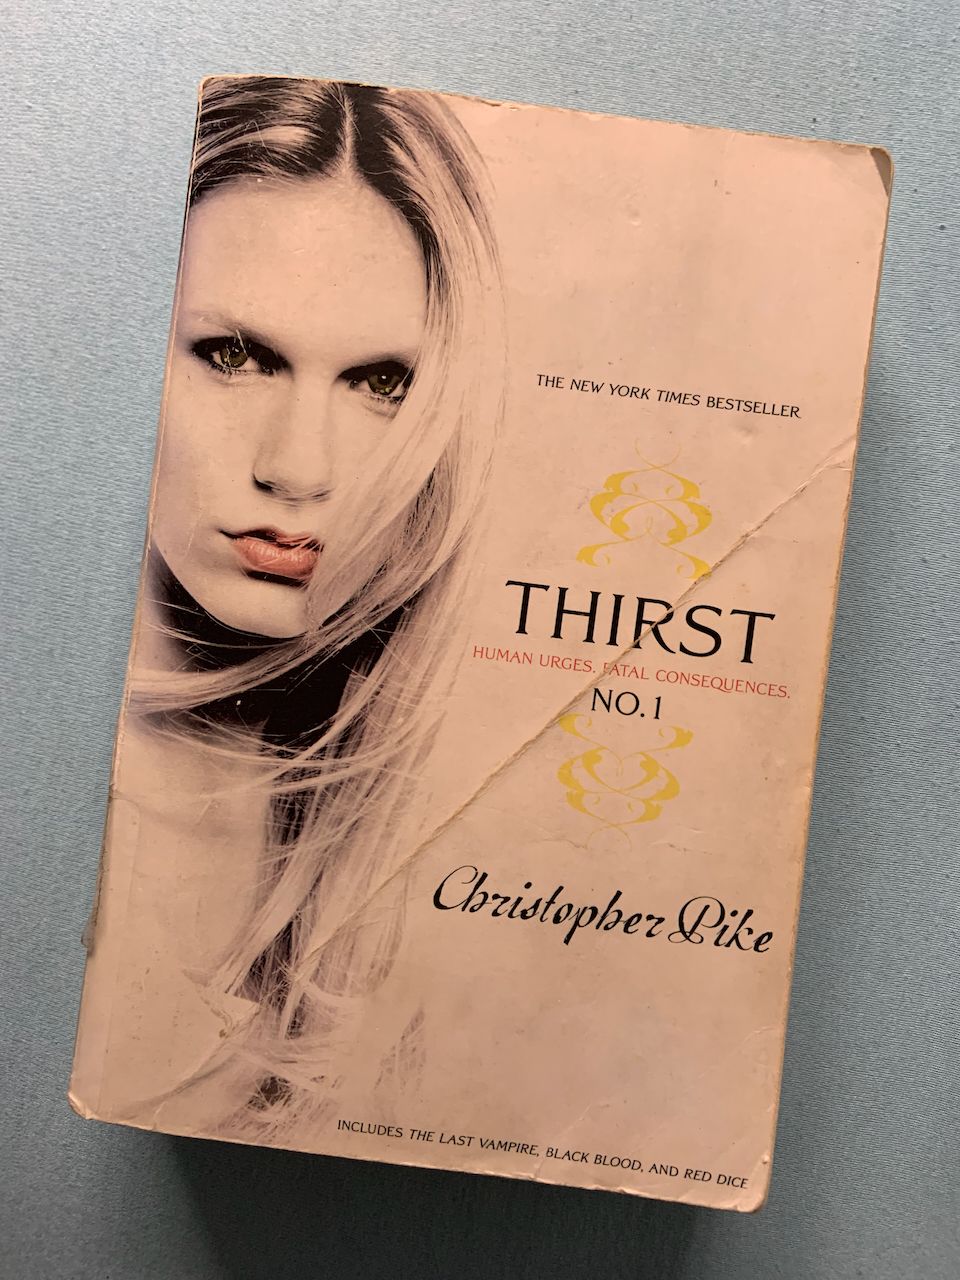 Front paperback cover of Thirst No. 1 by Christopher Pike